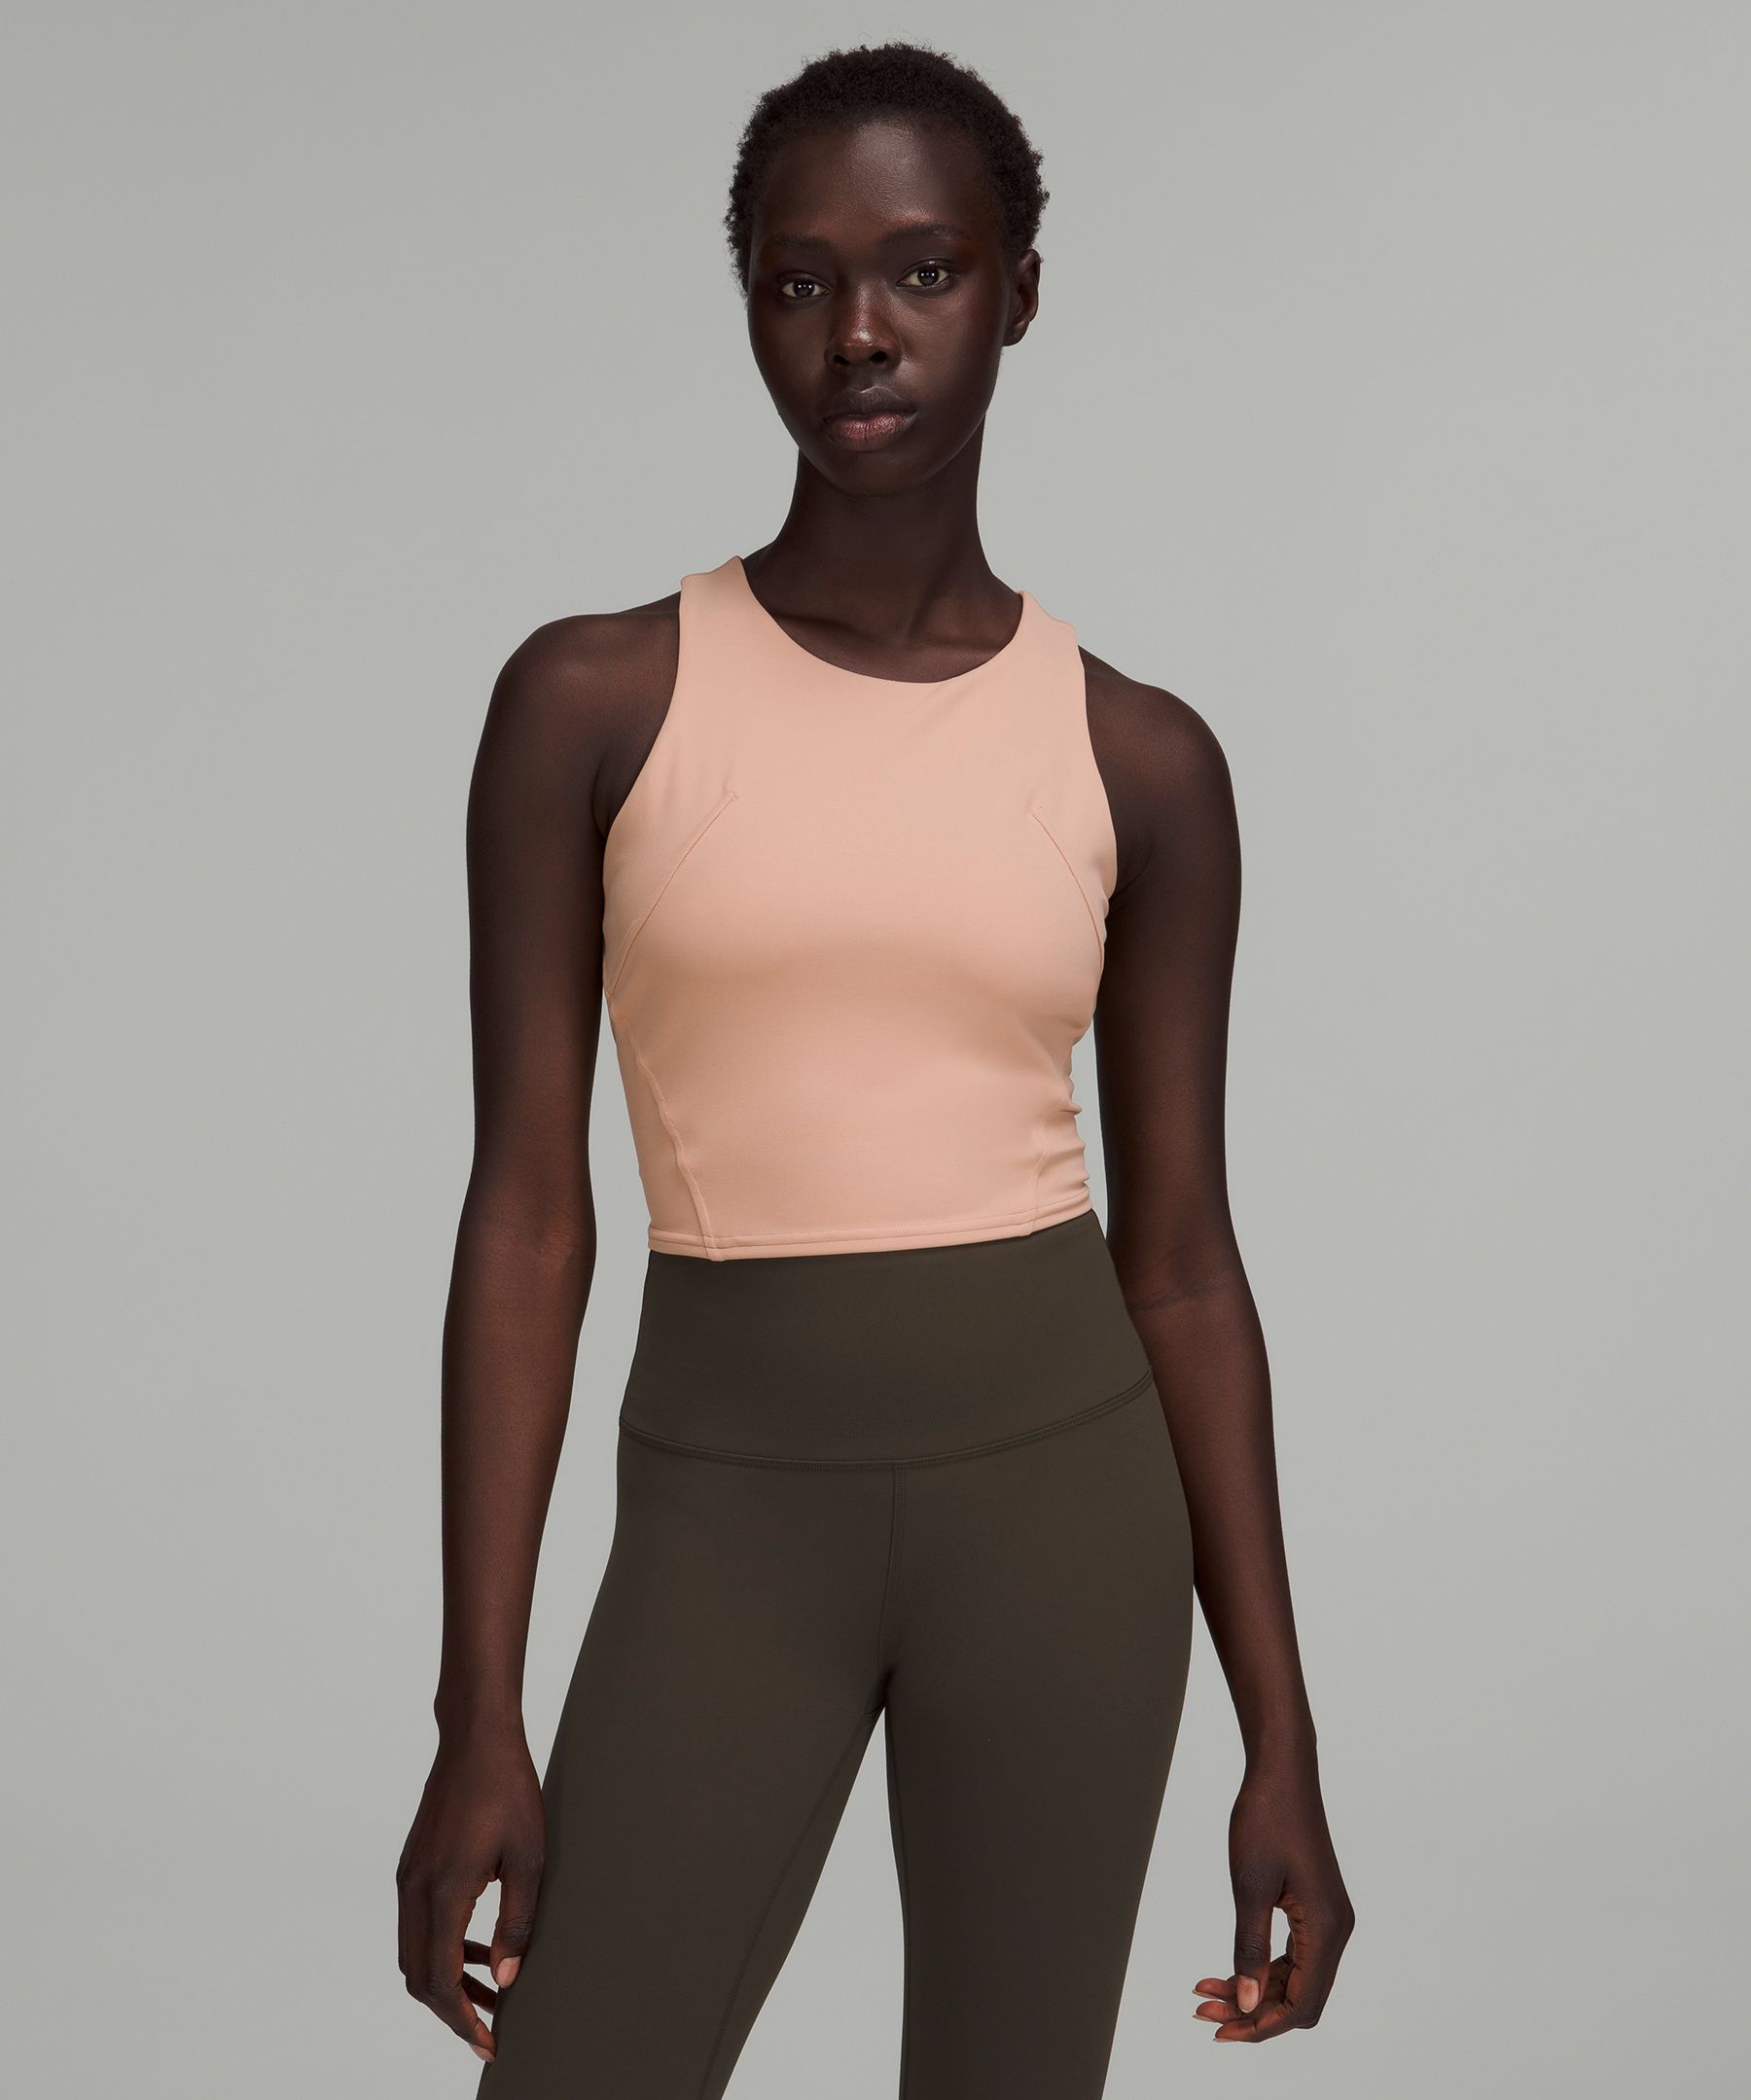 3 Workout Crops and Tanks You NEED From lululemon in 2022! - Nourish, Move,  Love